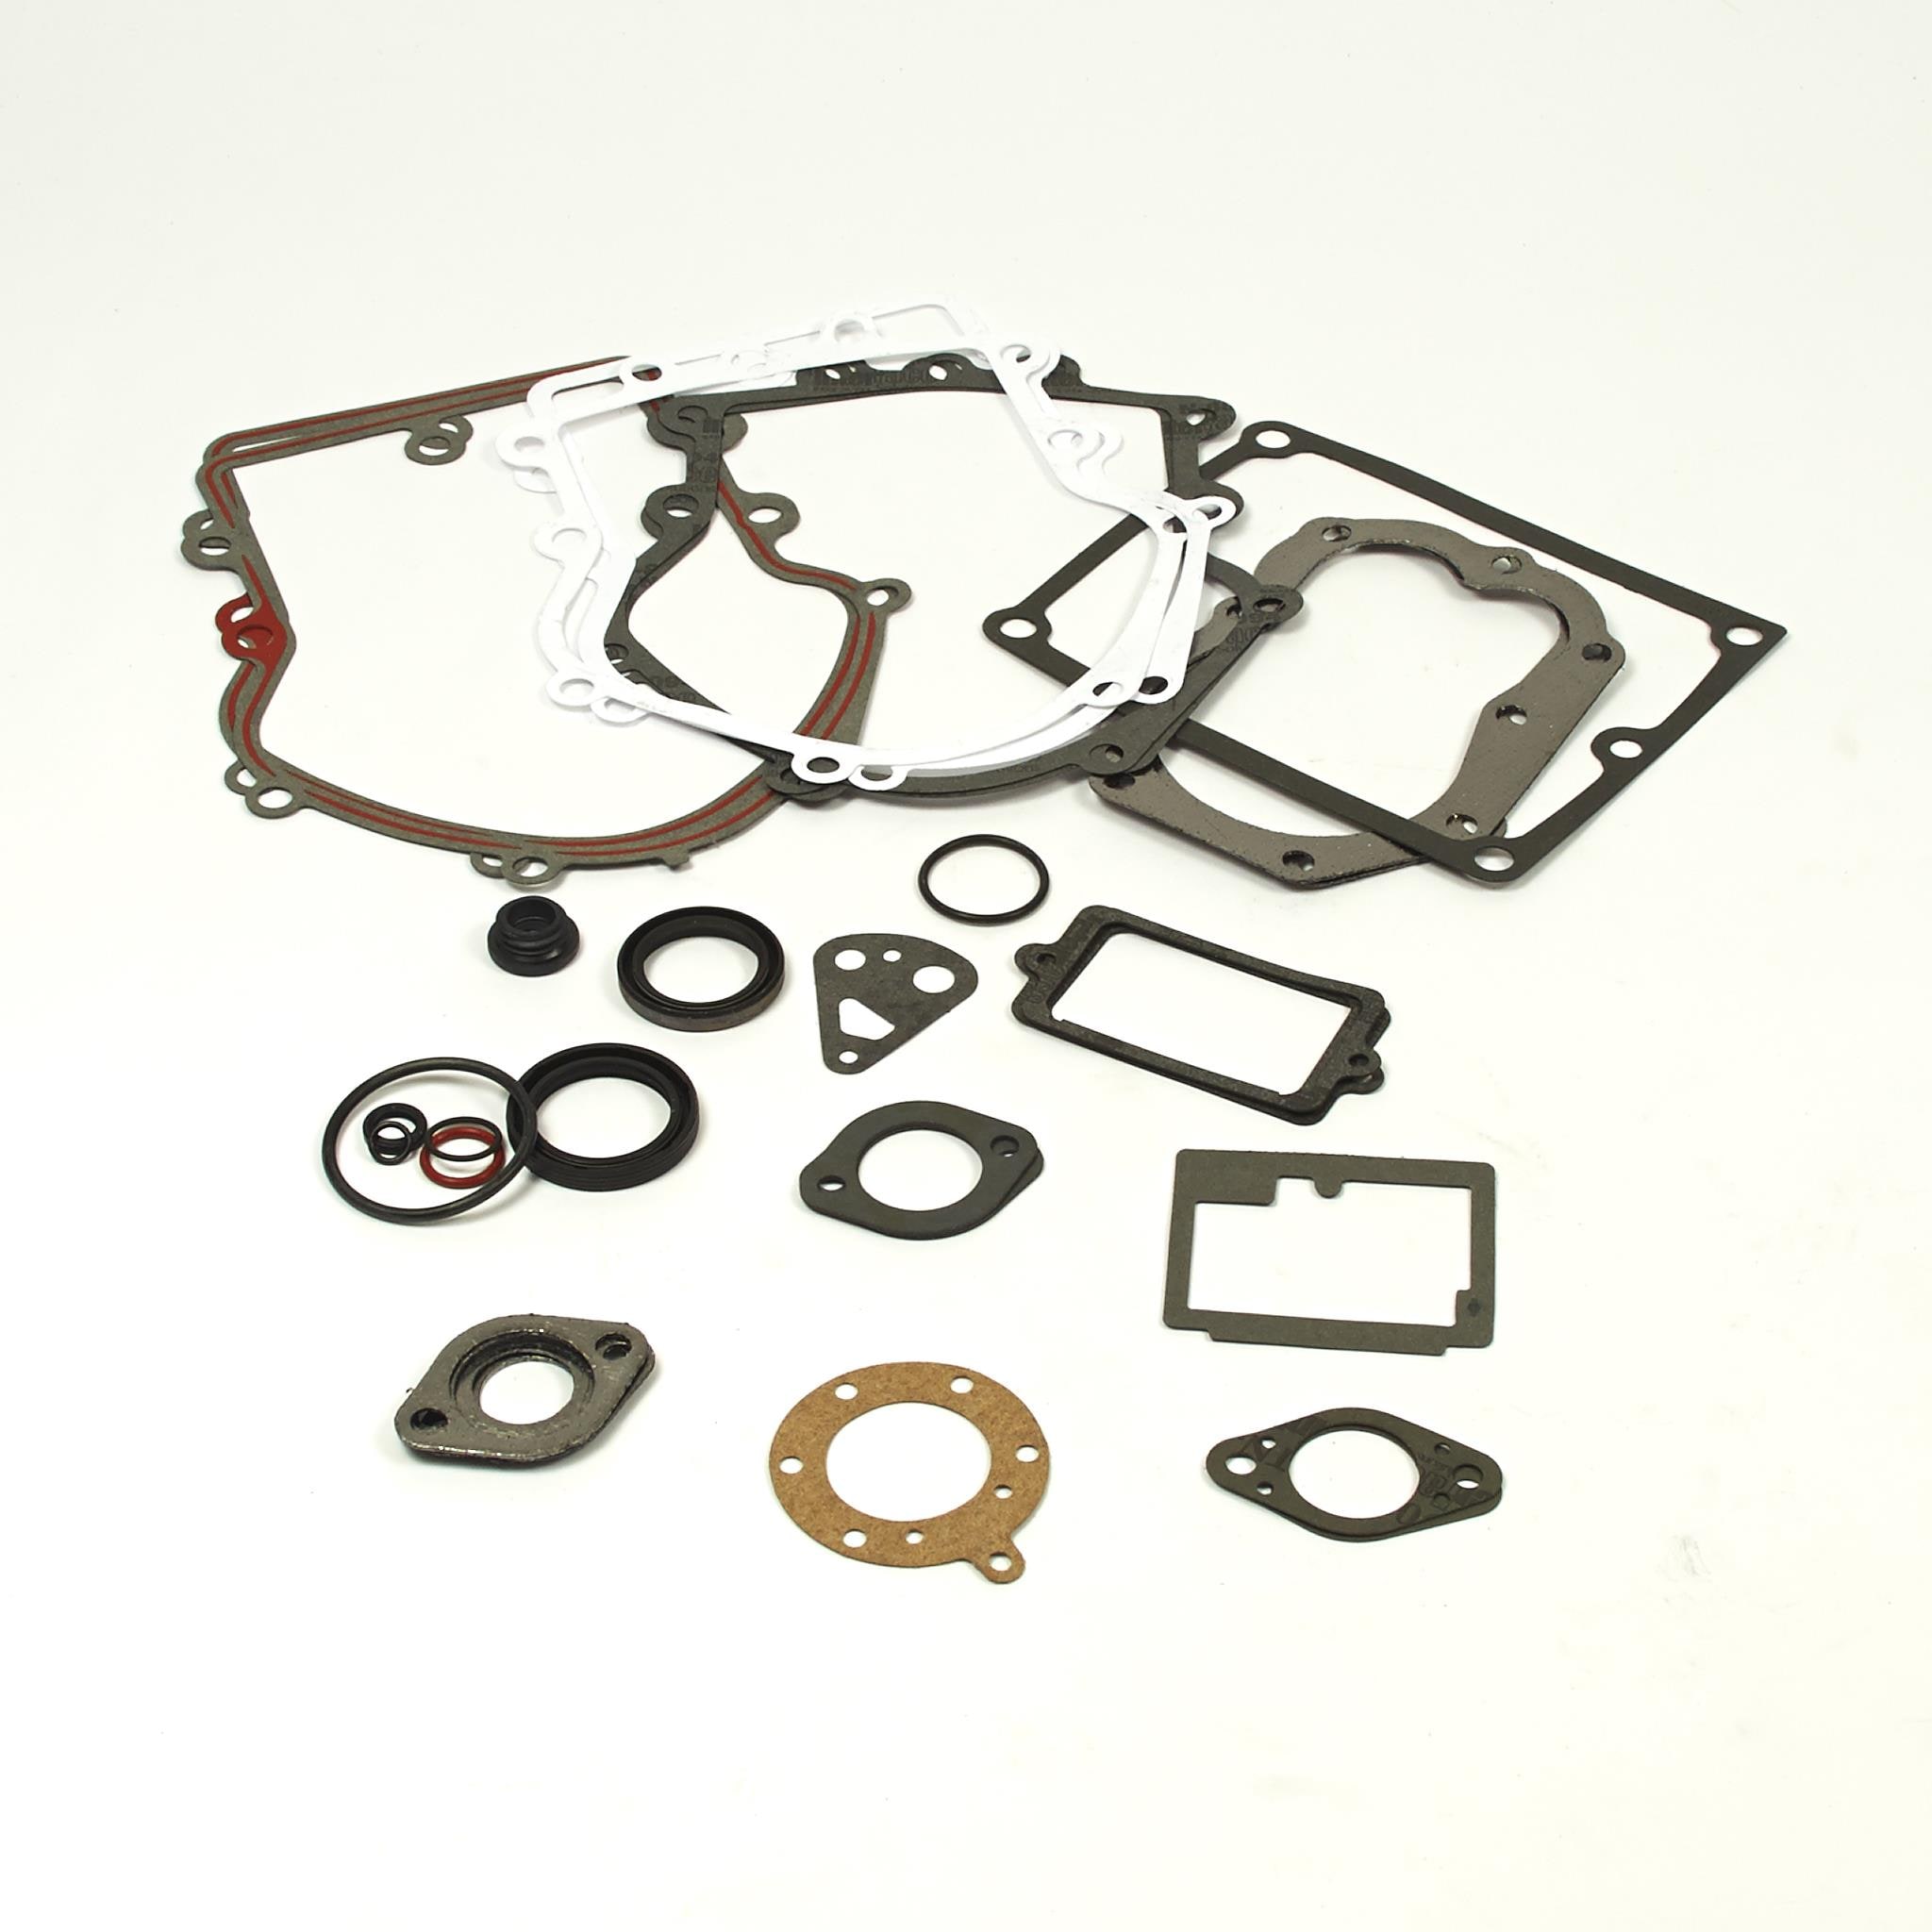 EgalBest Replacement Gasket Set Motorbike Gasket for Briggs and Stratton 391834/492653 Includes Seals